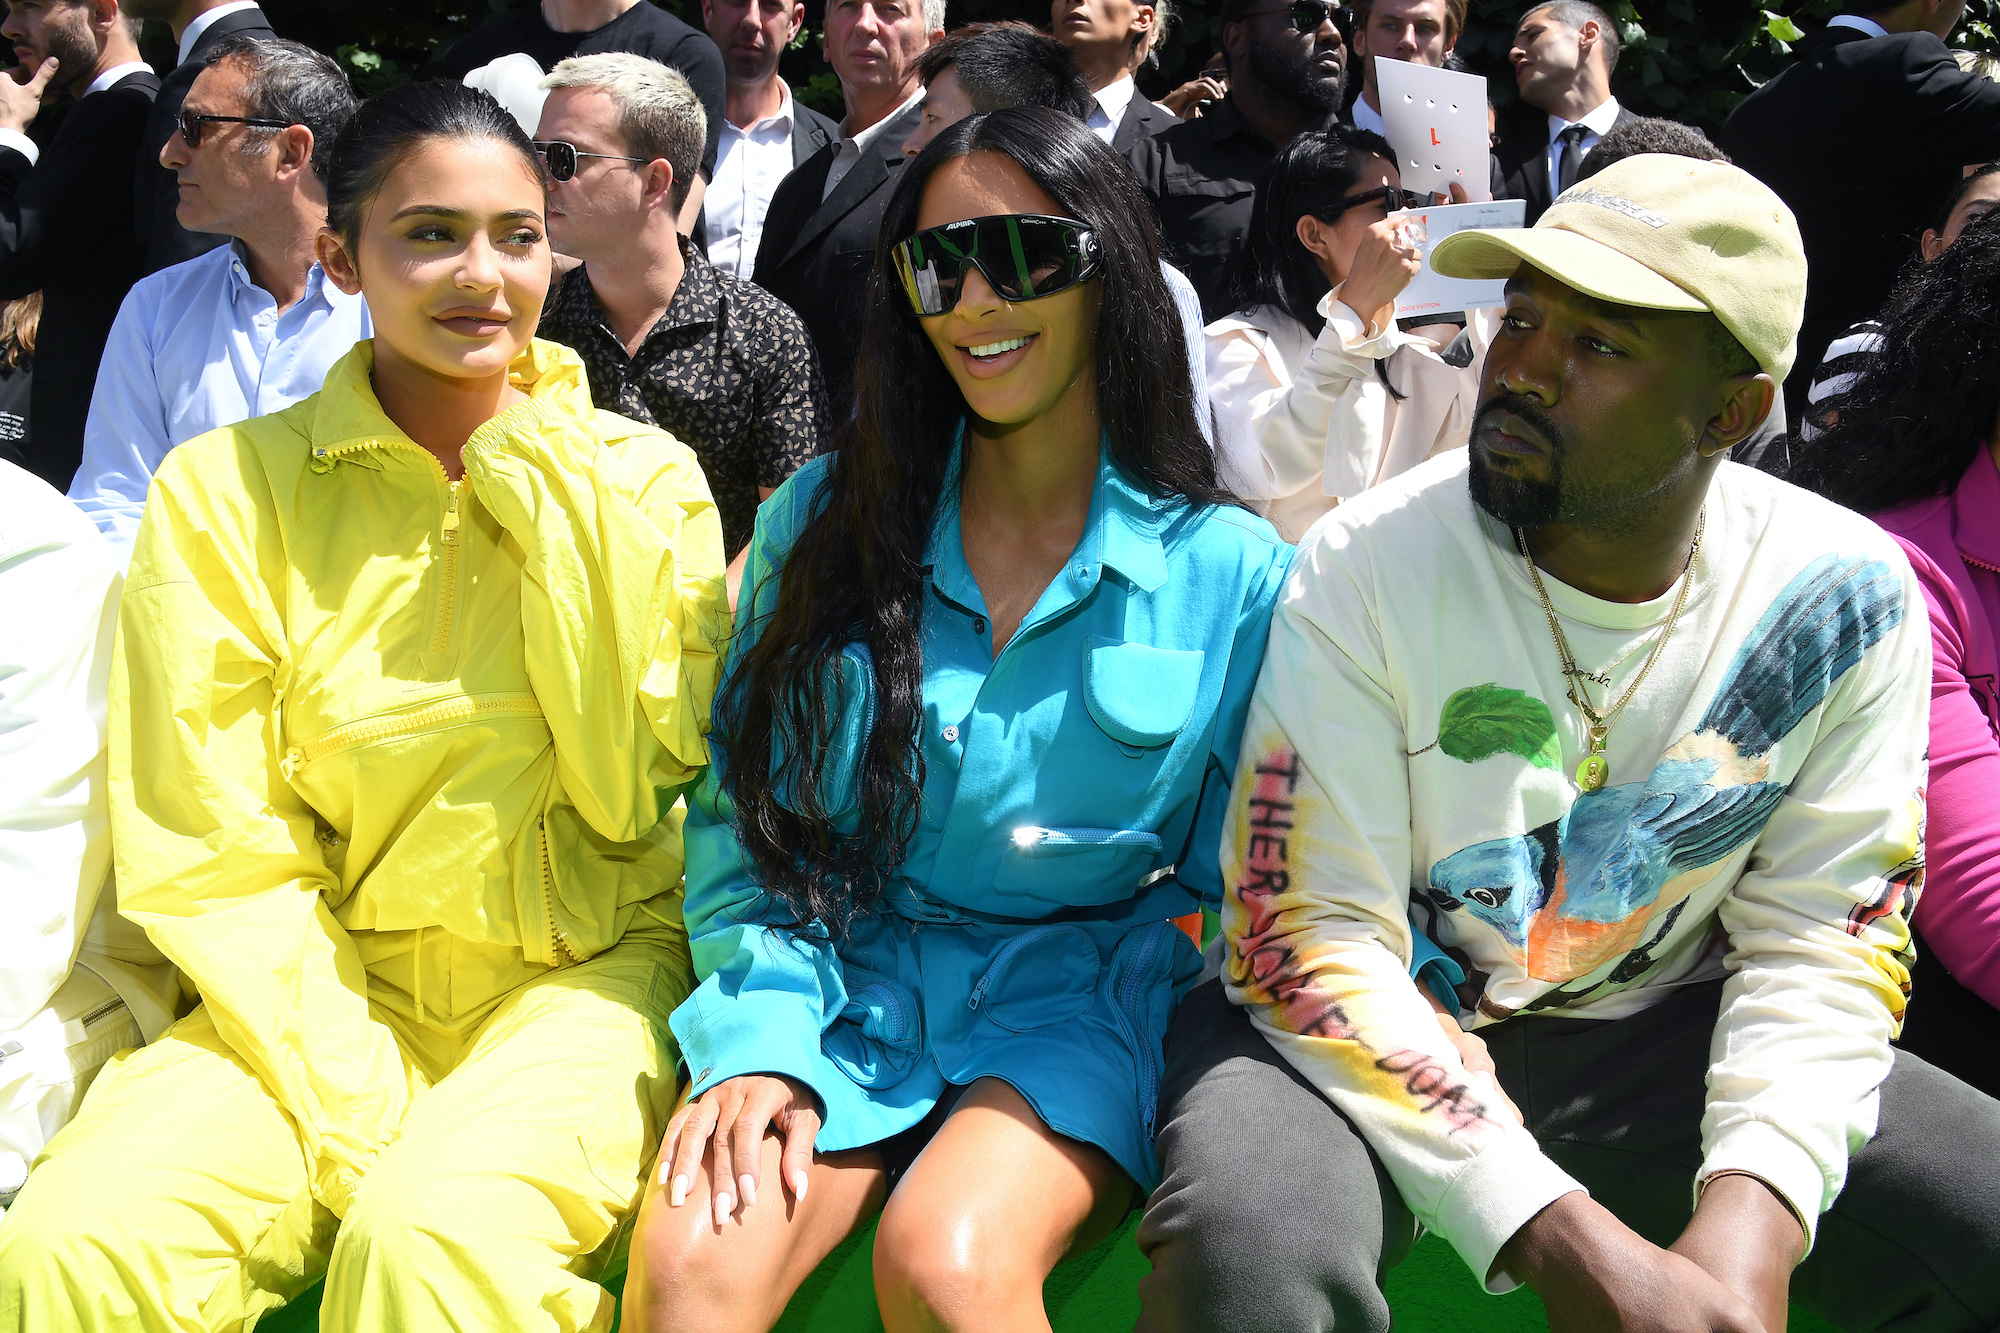 Was Kylie Jenner S Instagram Shoe Cover Up A Nod To Kimye S Split Or No Big Deal